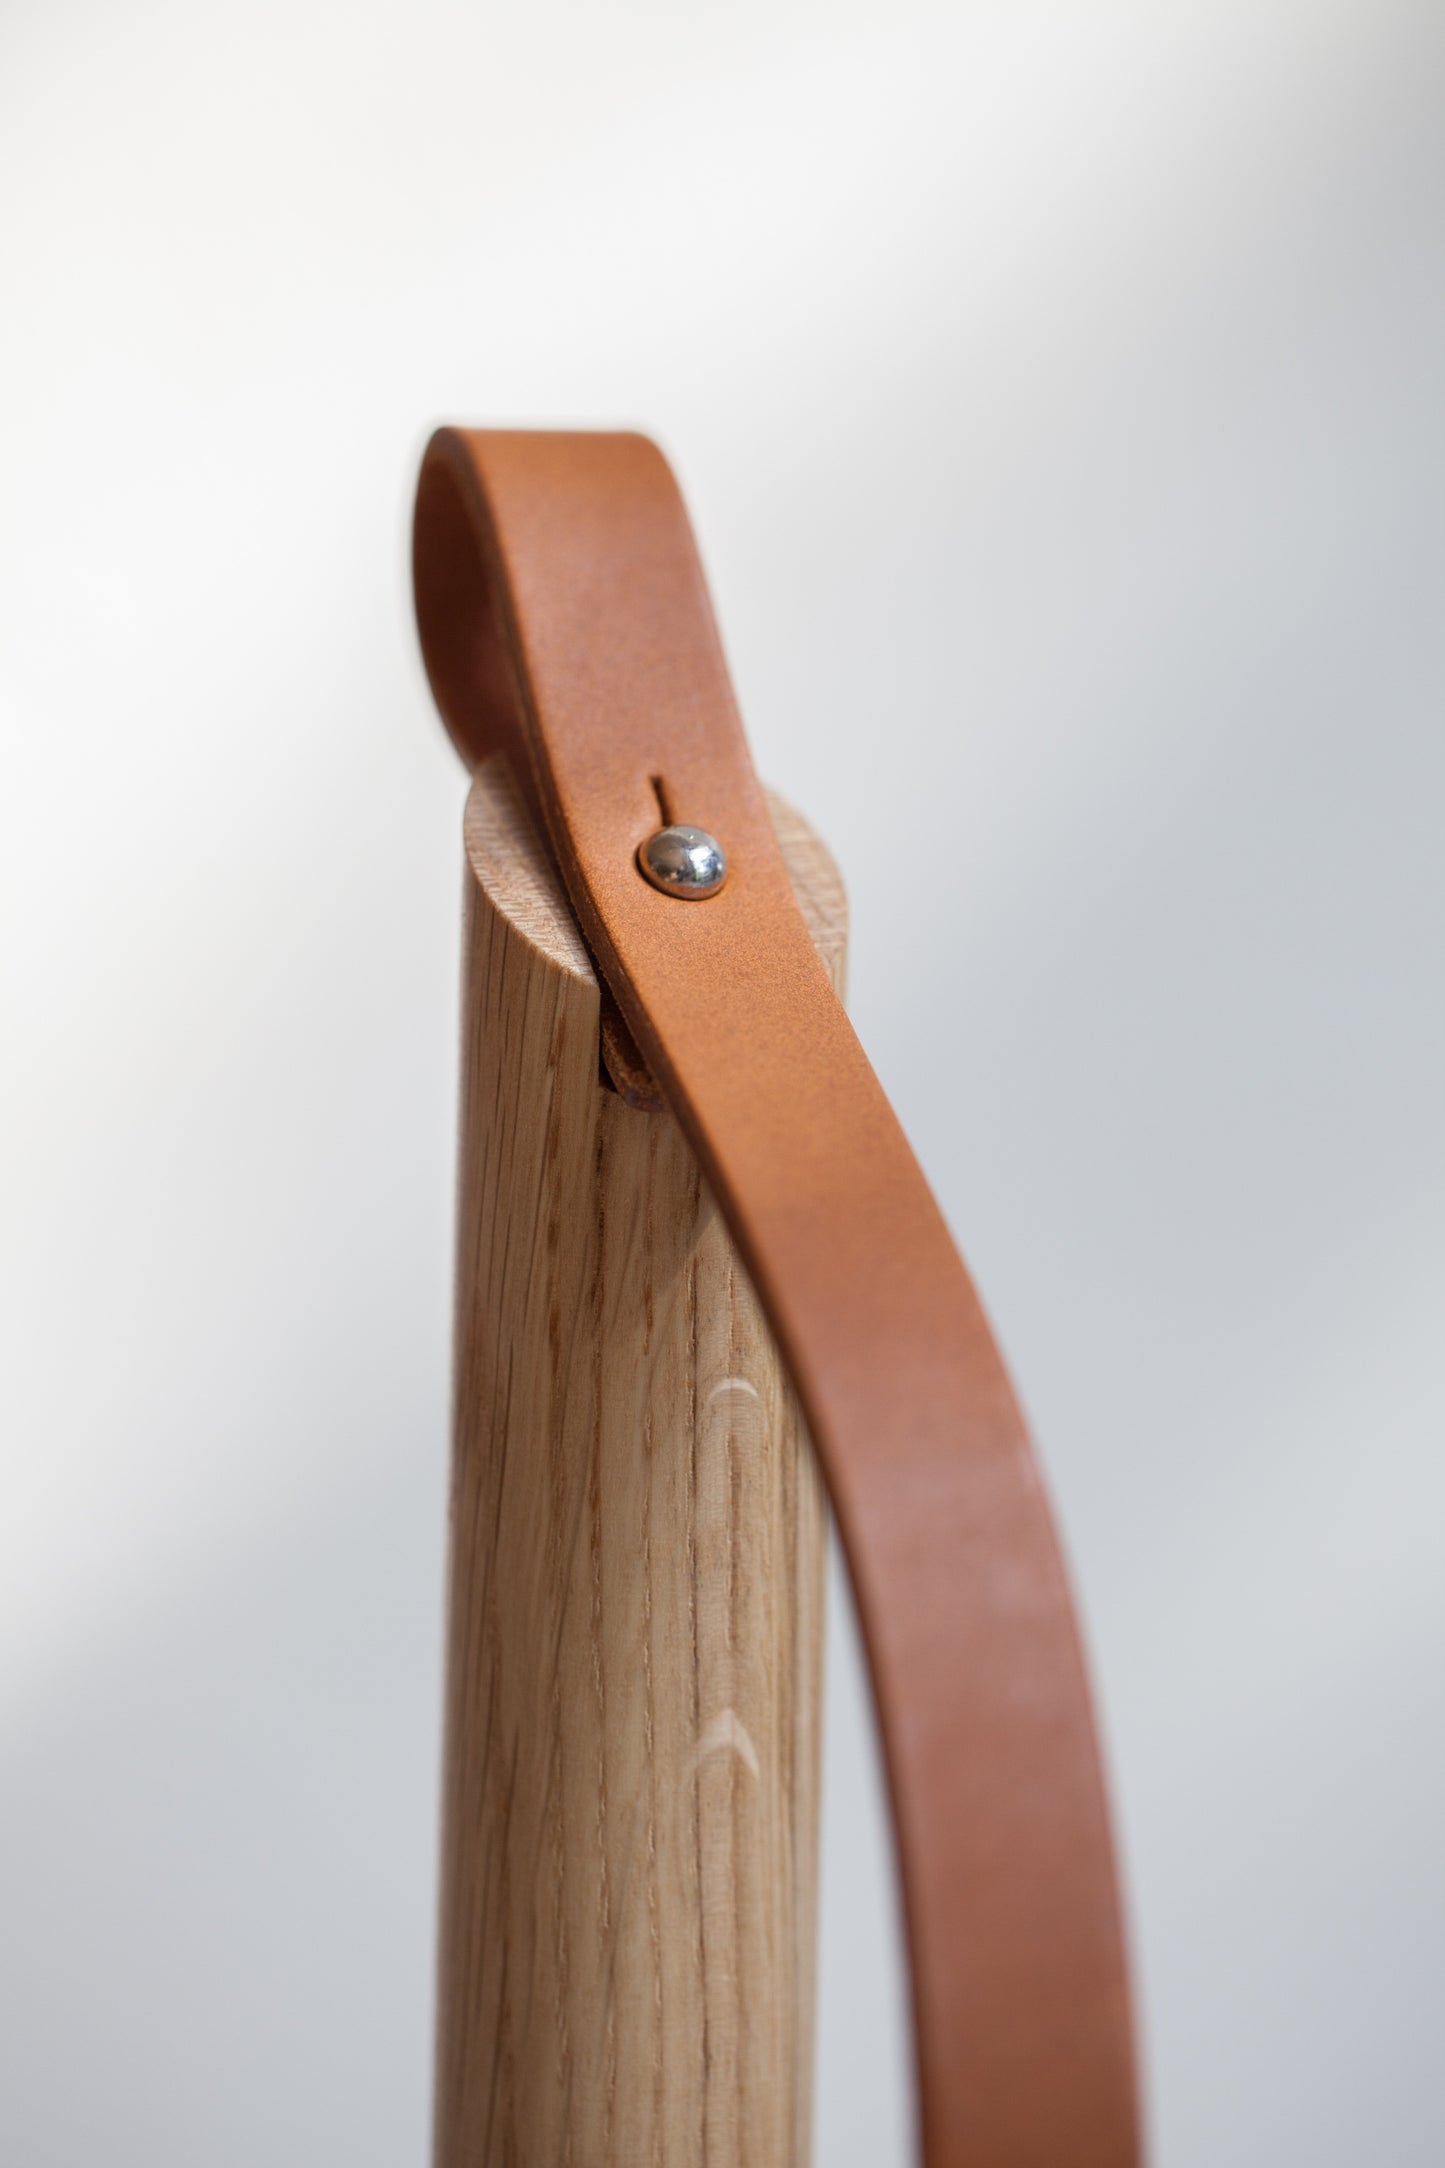 Oiled oak wood and leather strap details of the Paper-Towel Holder by EKTA Living